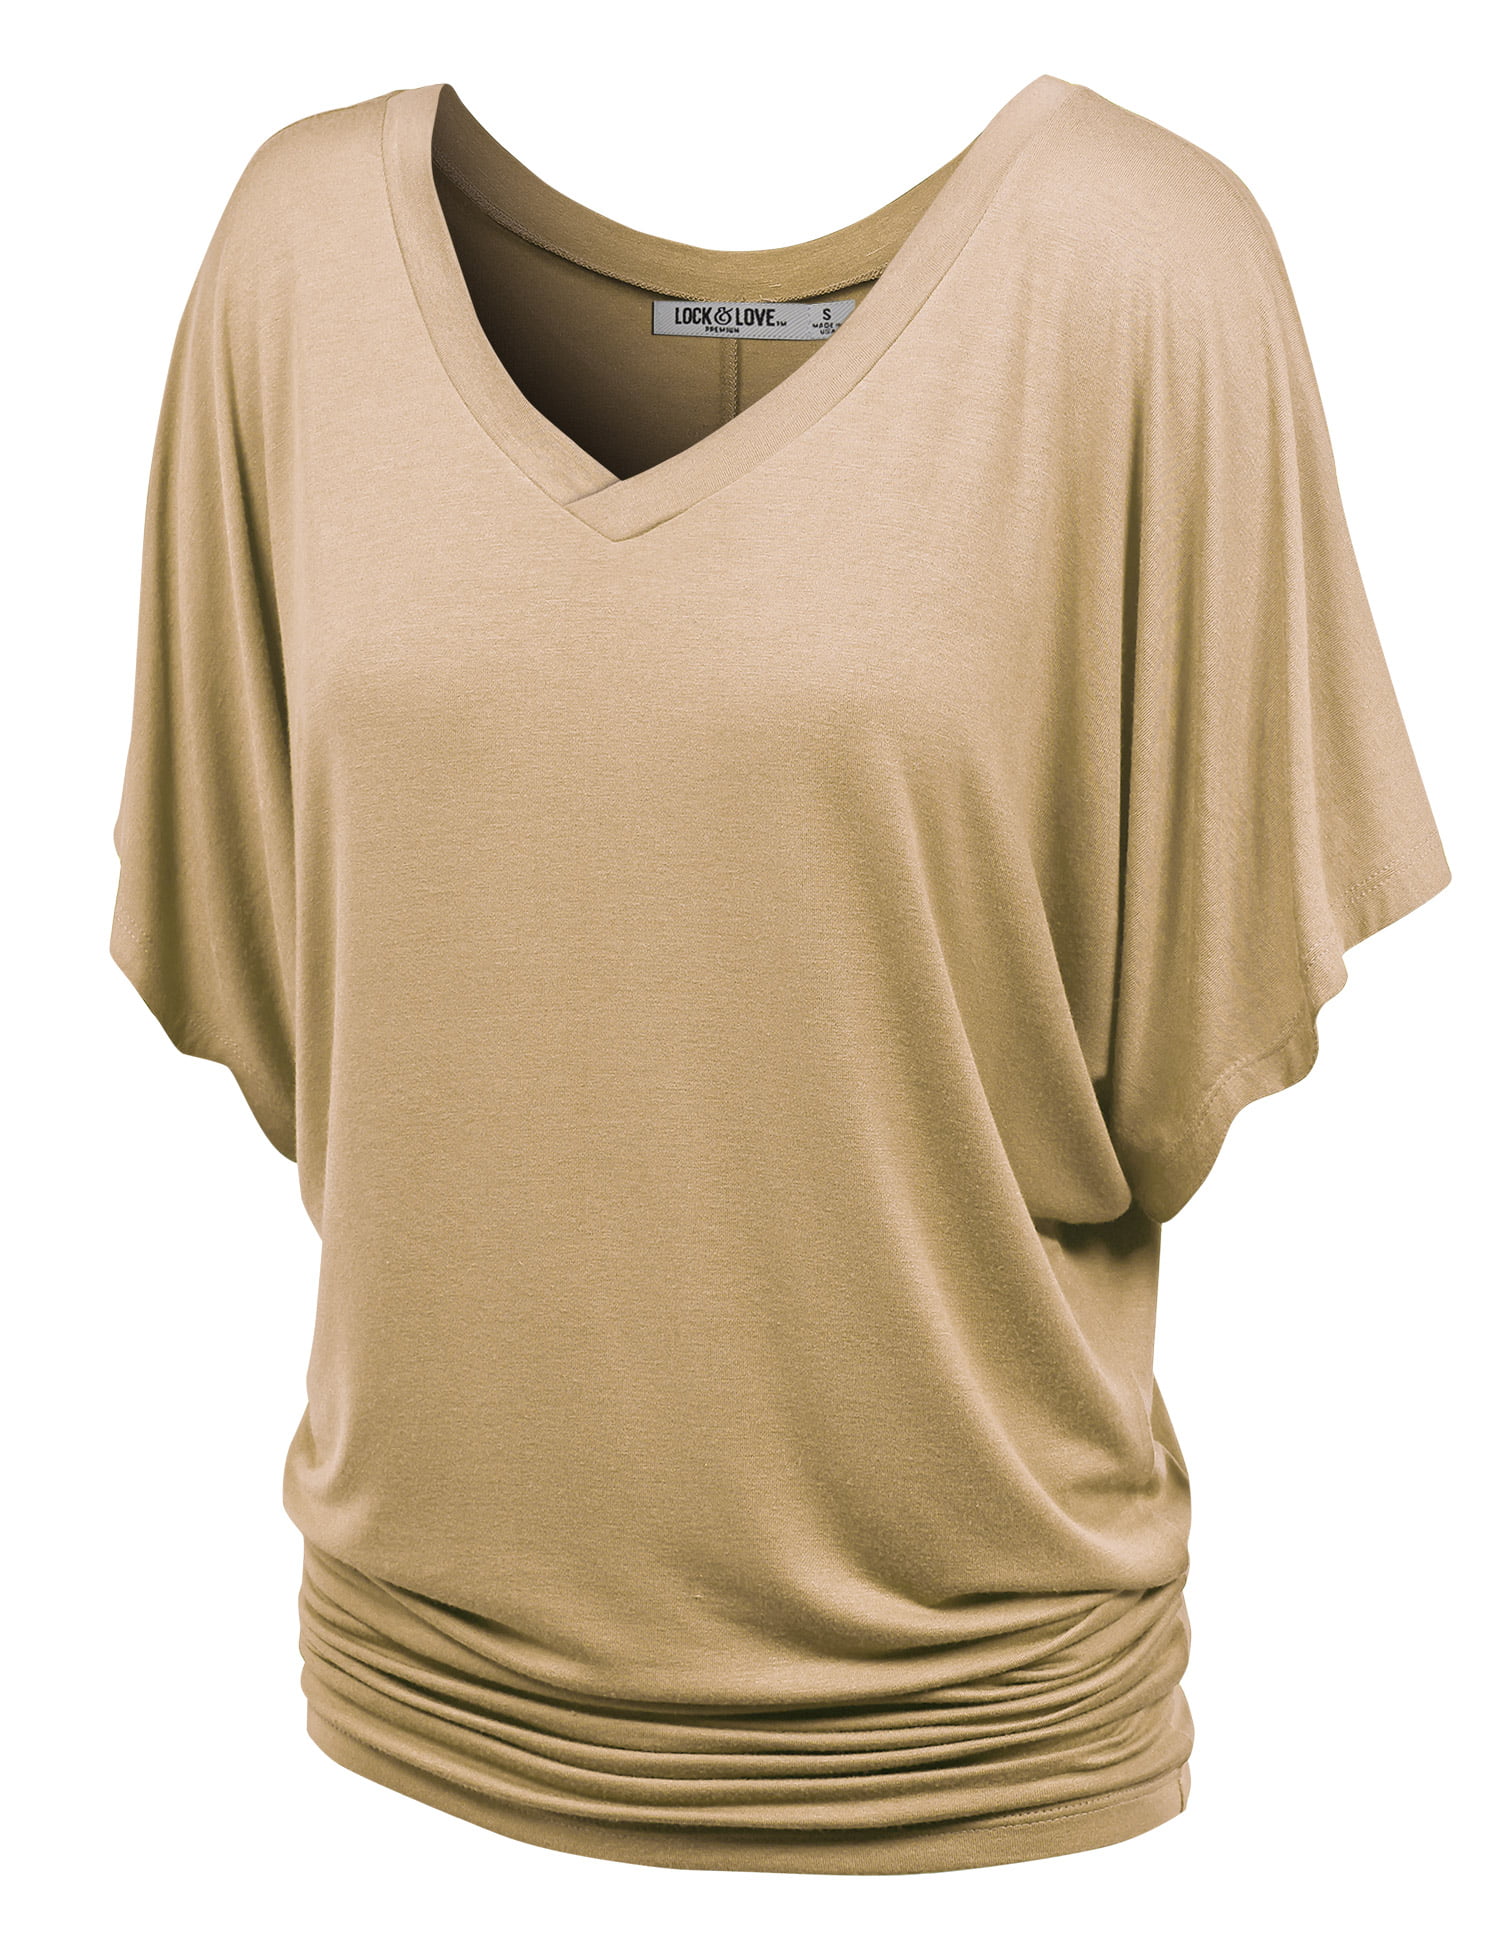 Made by Johnny Women's V-Neck Short Sleeve Dolman Top XS TAUPE - Walmart.com